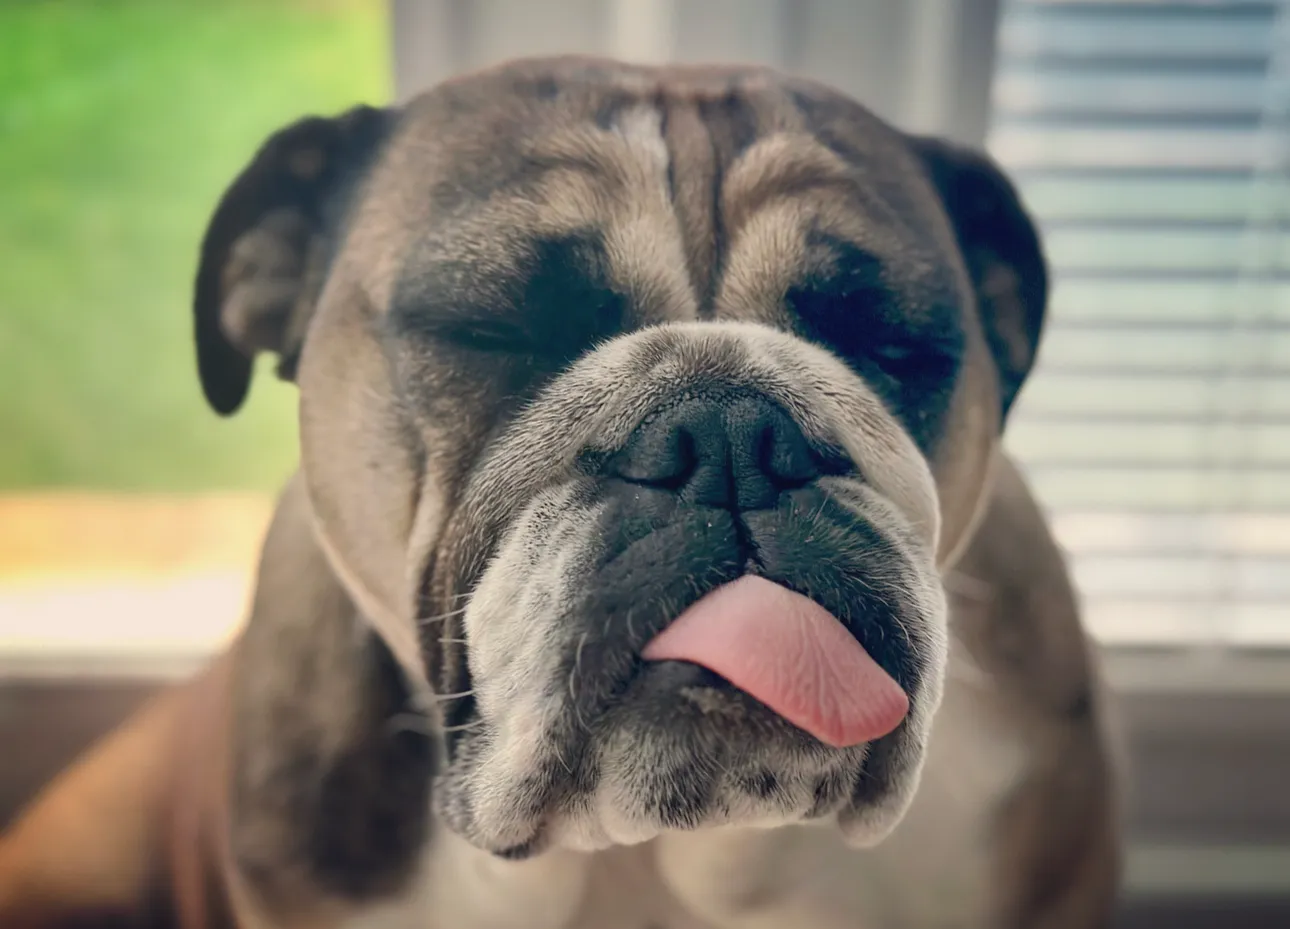 A bulldog with its tongue out / Furrimals